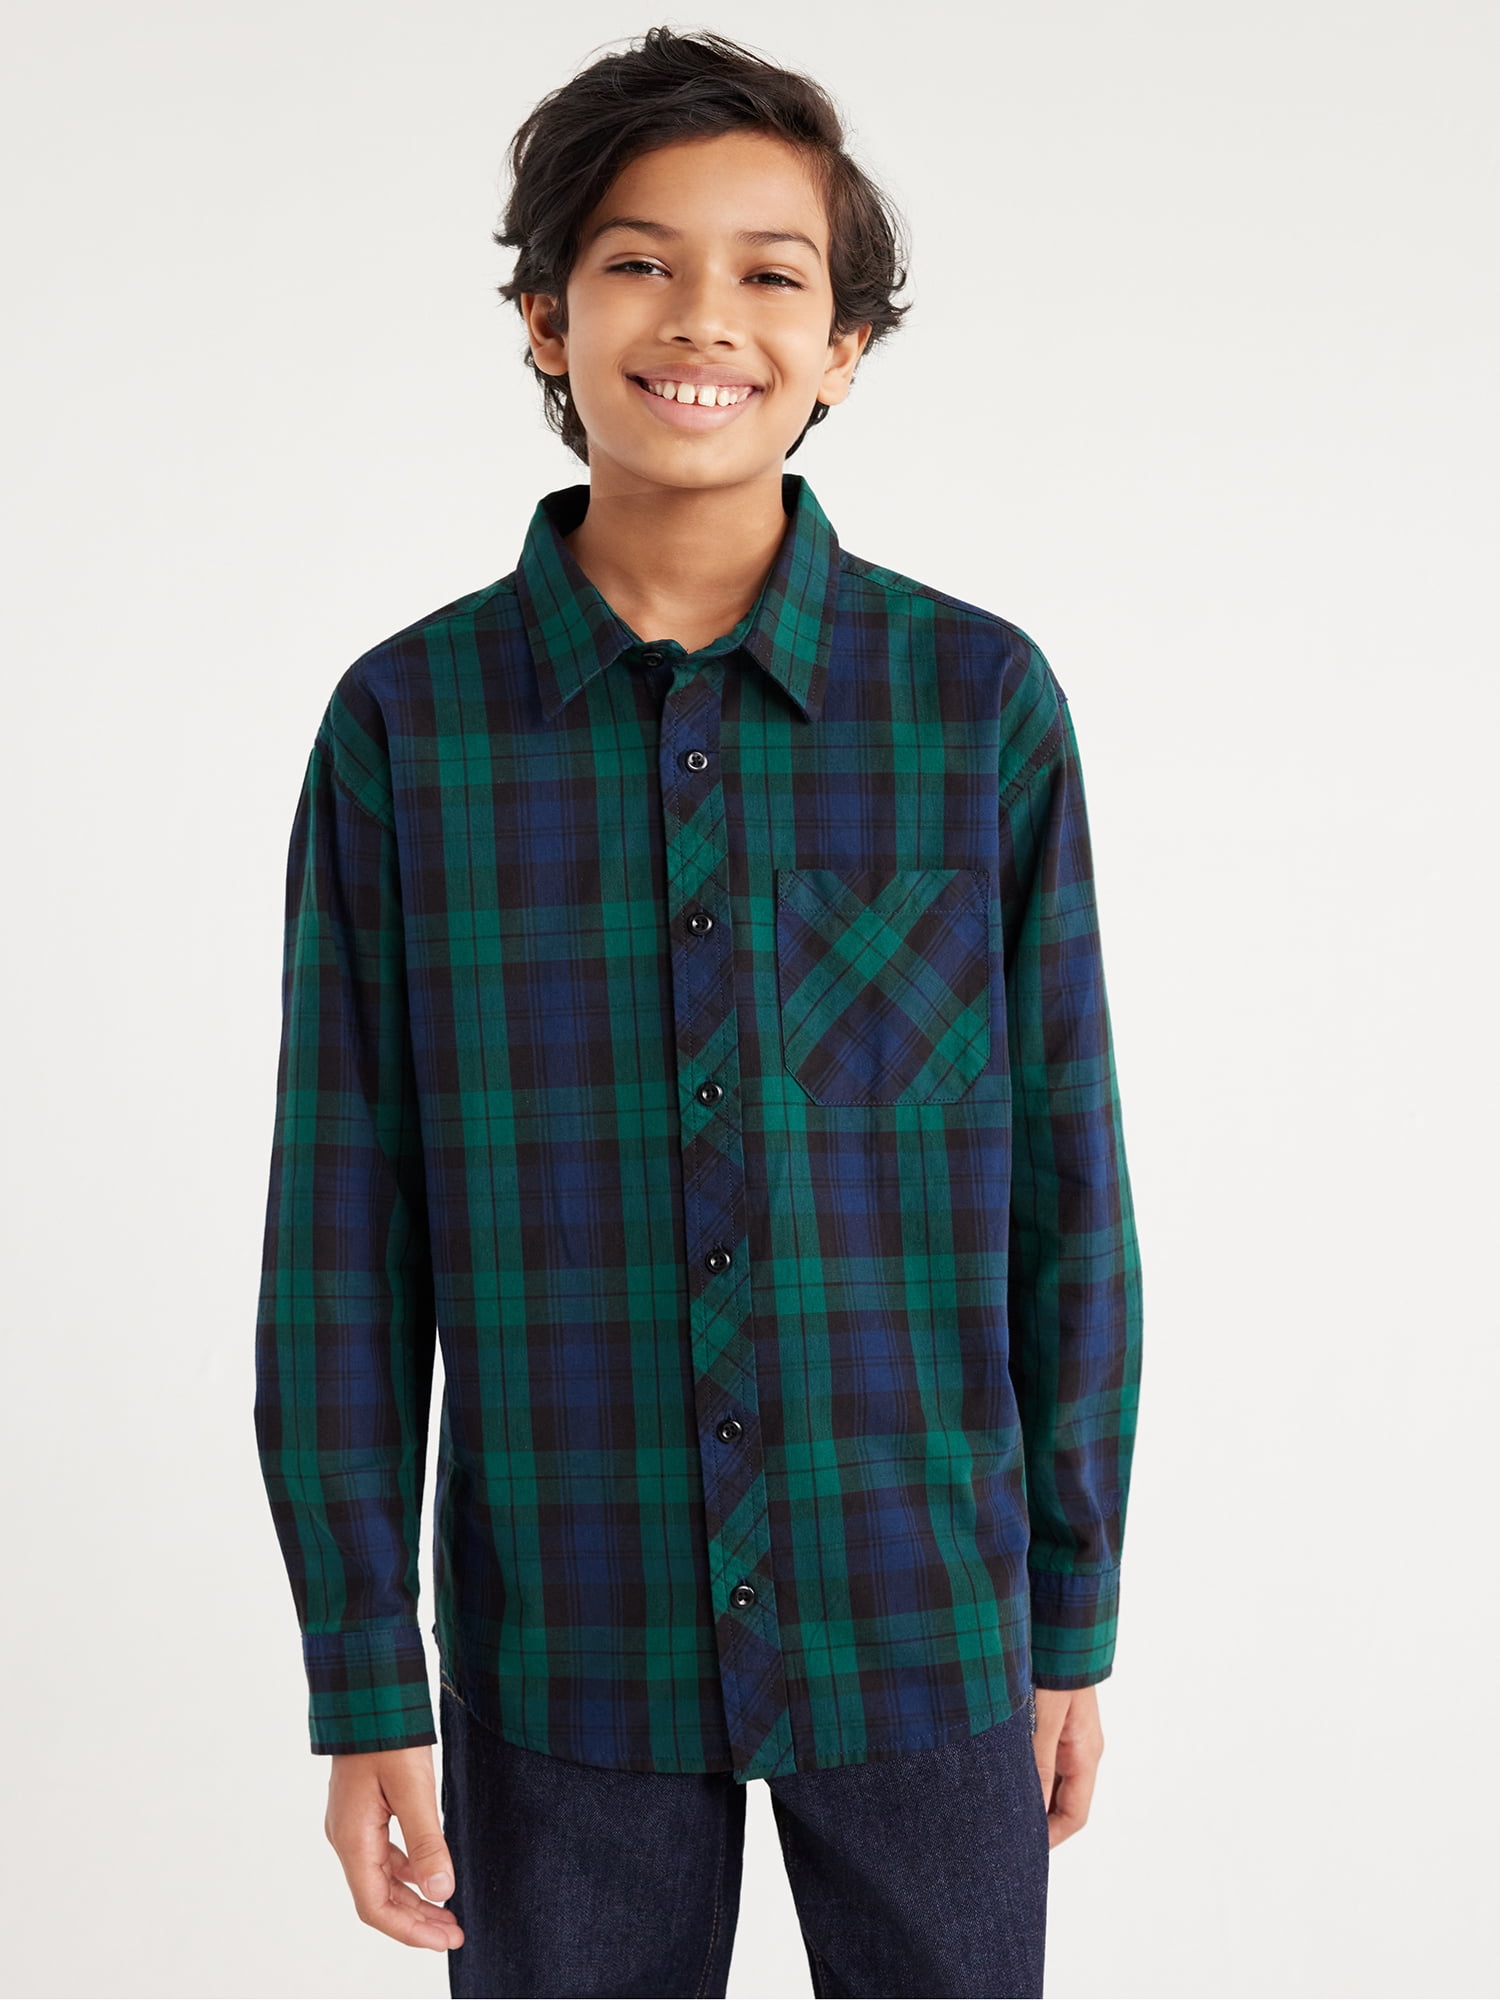 Free Assembly Boys Button Down Shirt with Long Sleeves, Sizes 4-18 ...